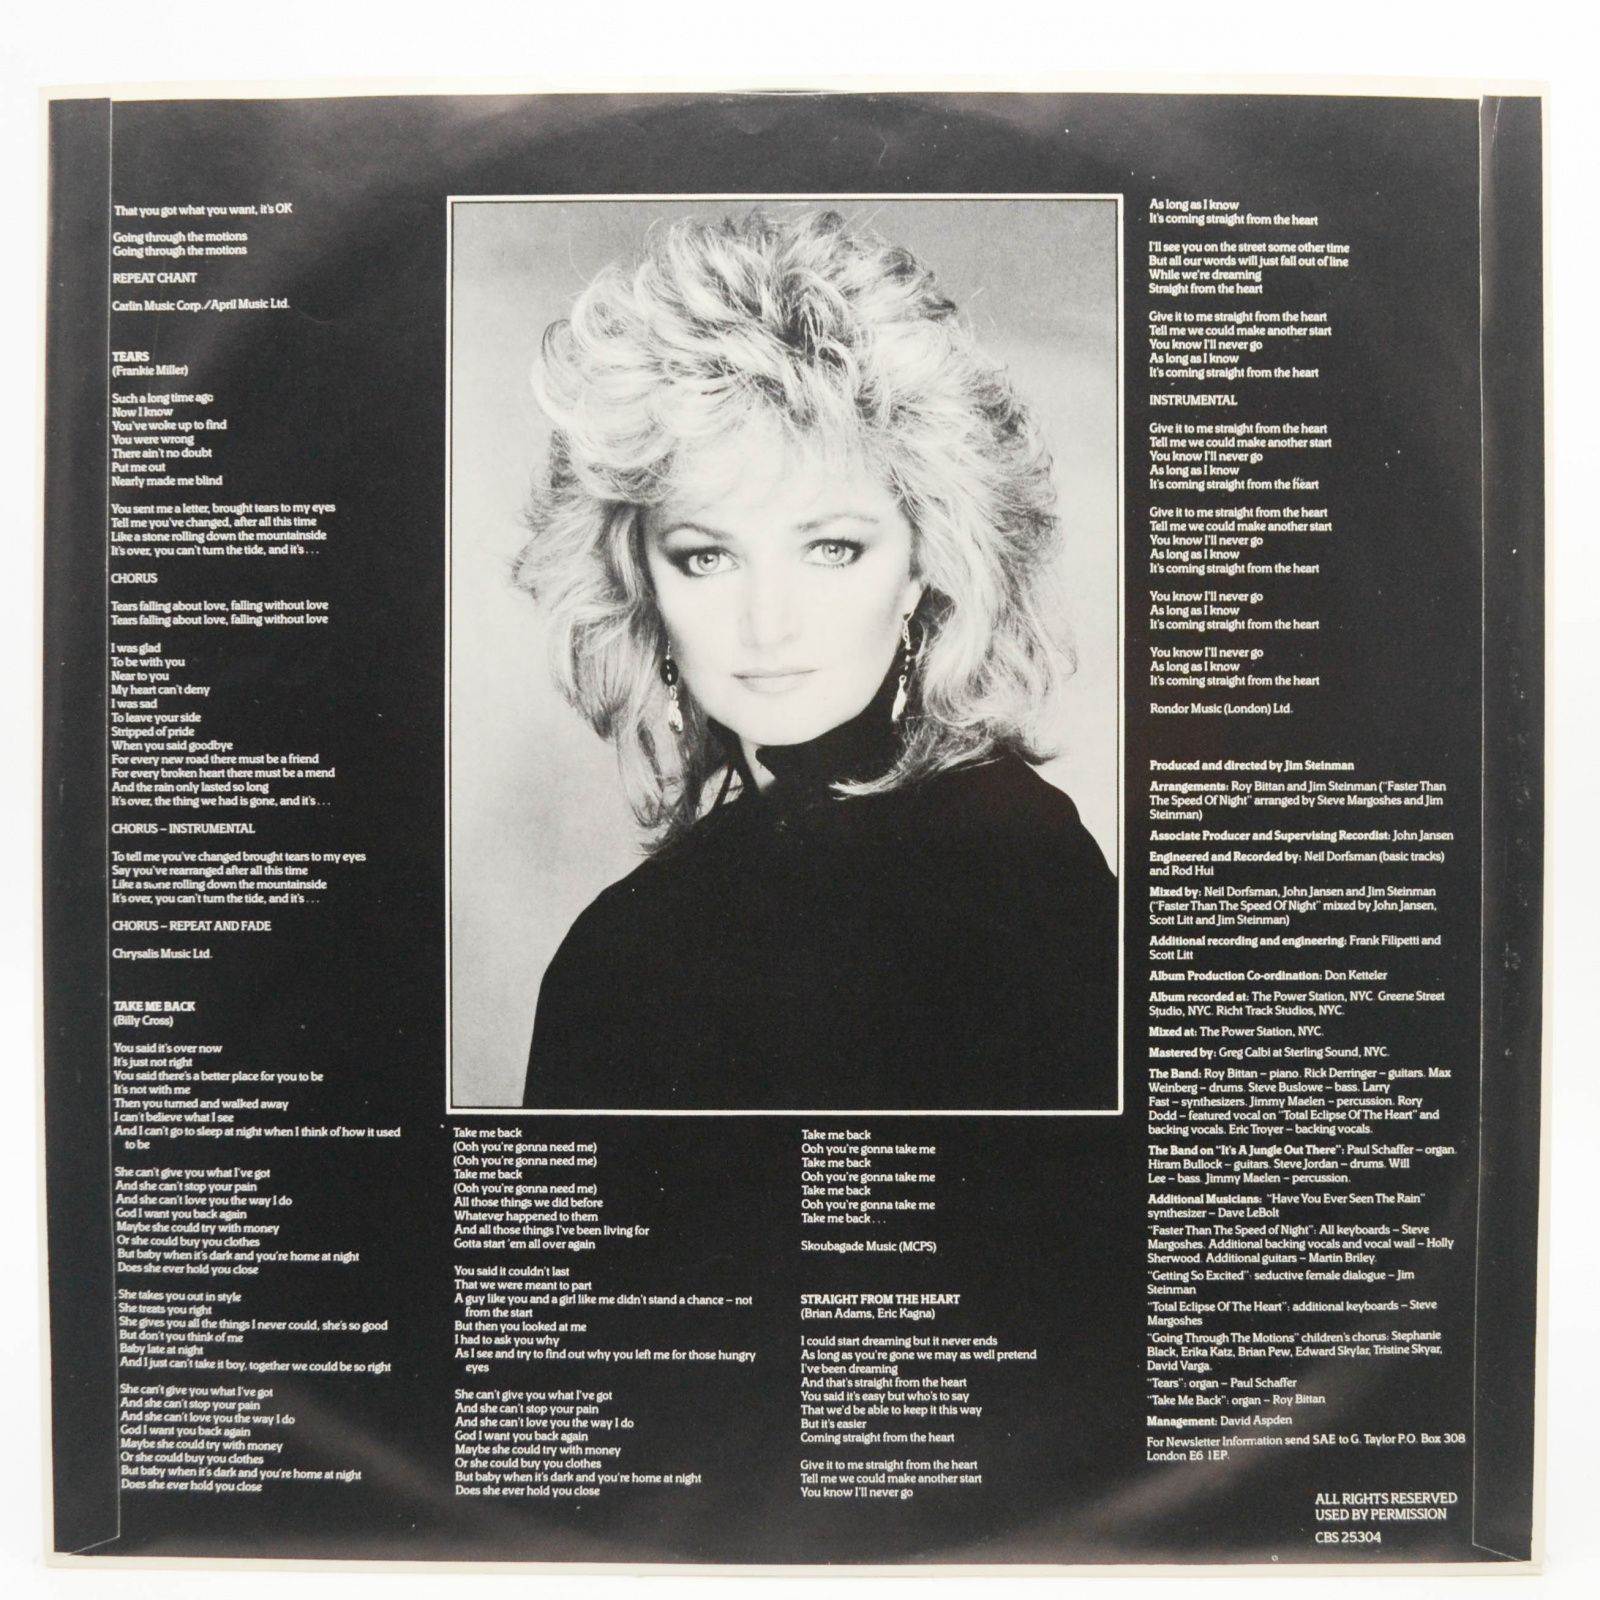 Bonnie Tyler — Faster Than The Speed Of Night (1-st, UK), 1983